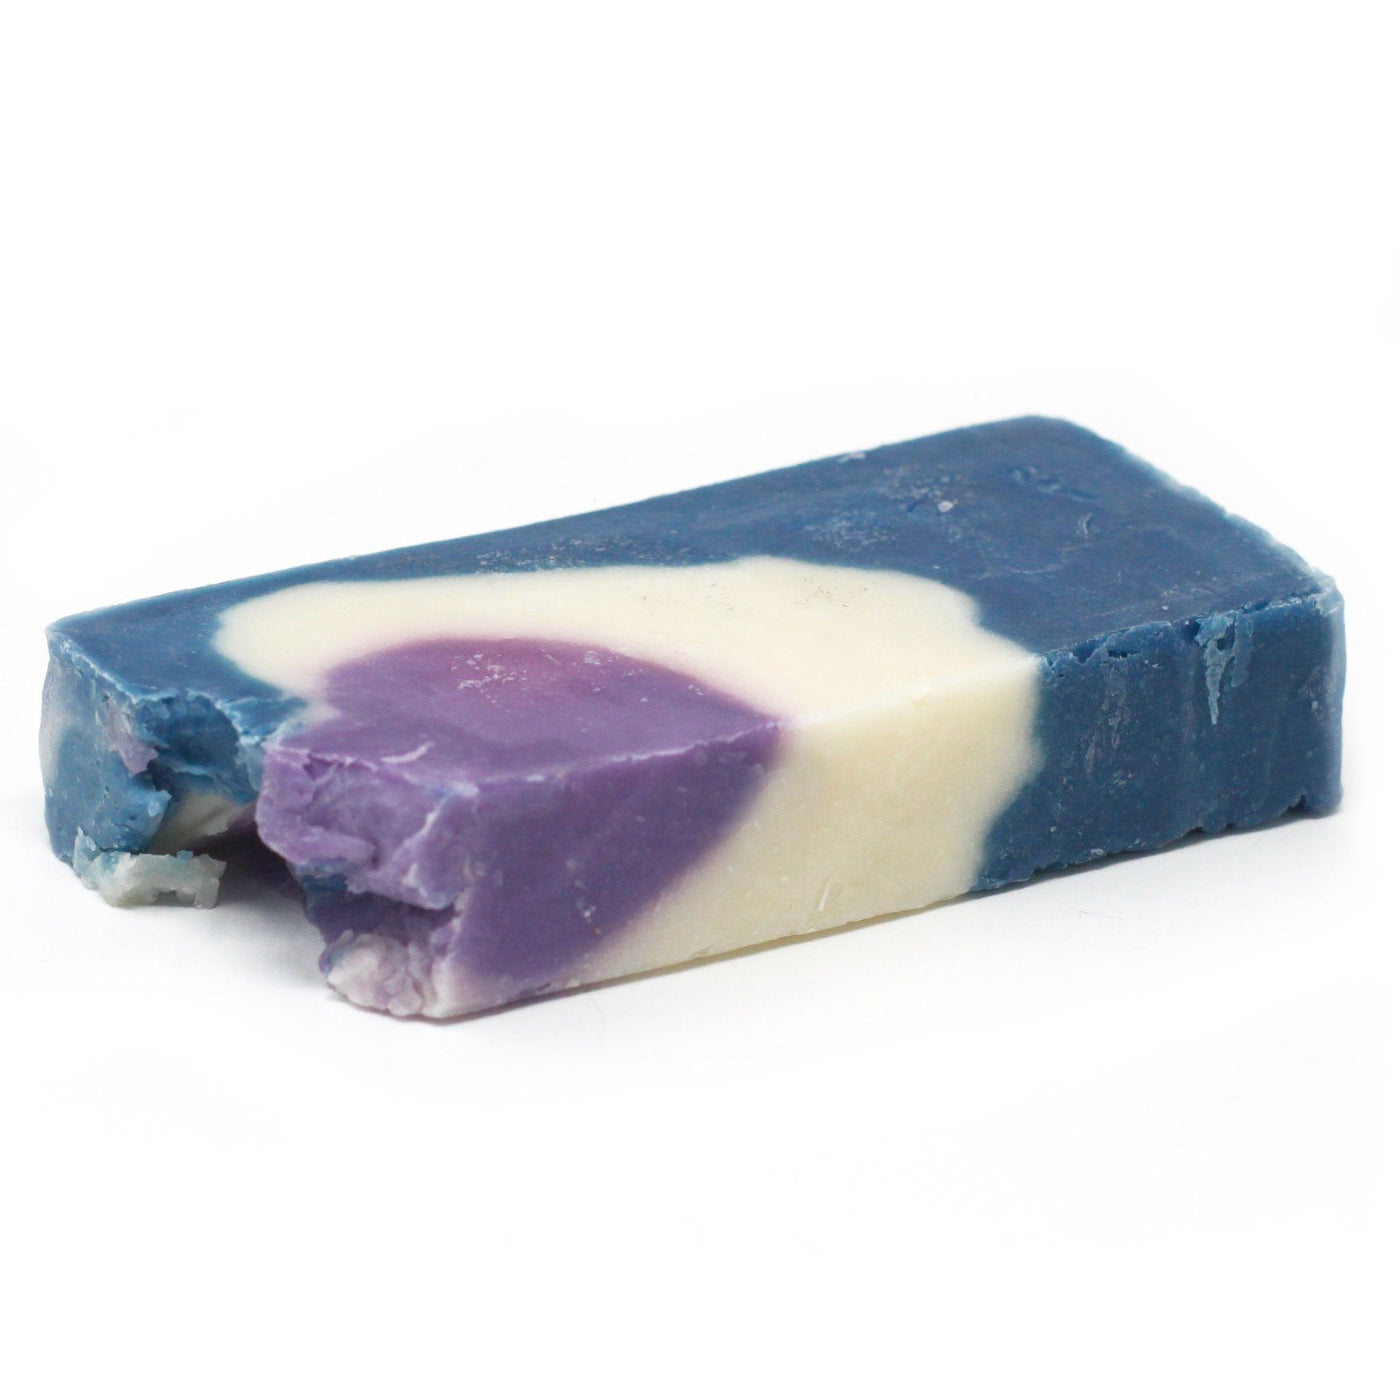 Herb of Grace Paraben Free Olive Oil Body Soap Loaf And Soap Slices.